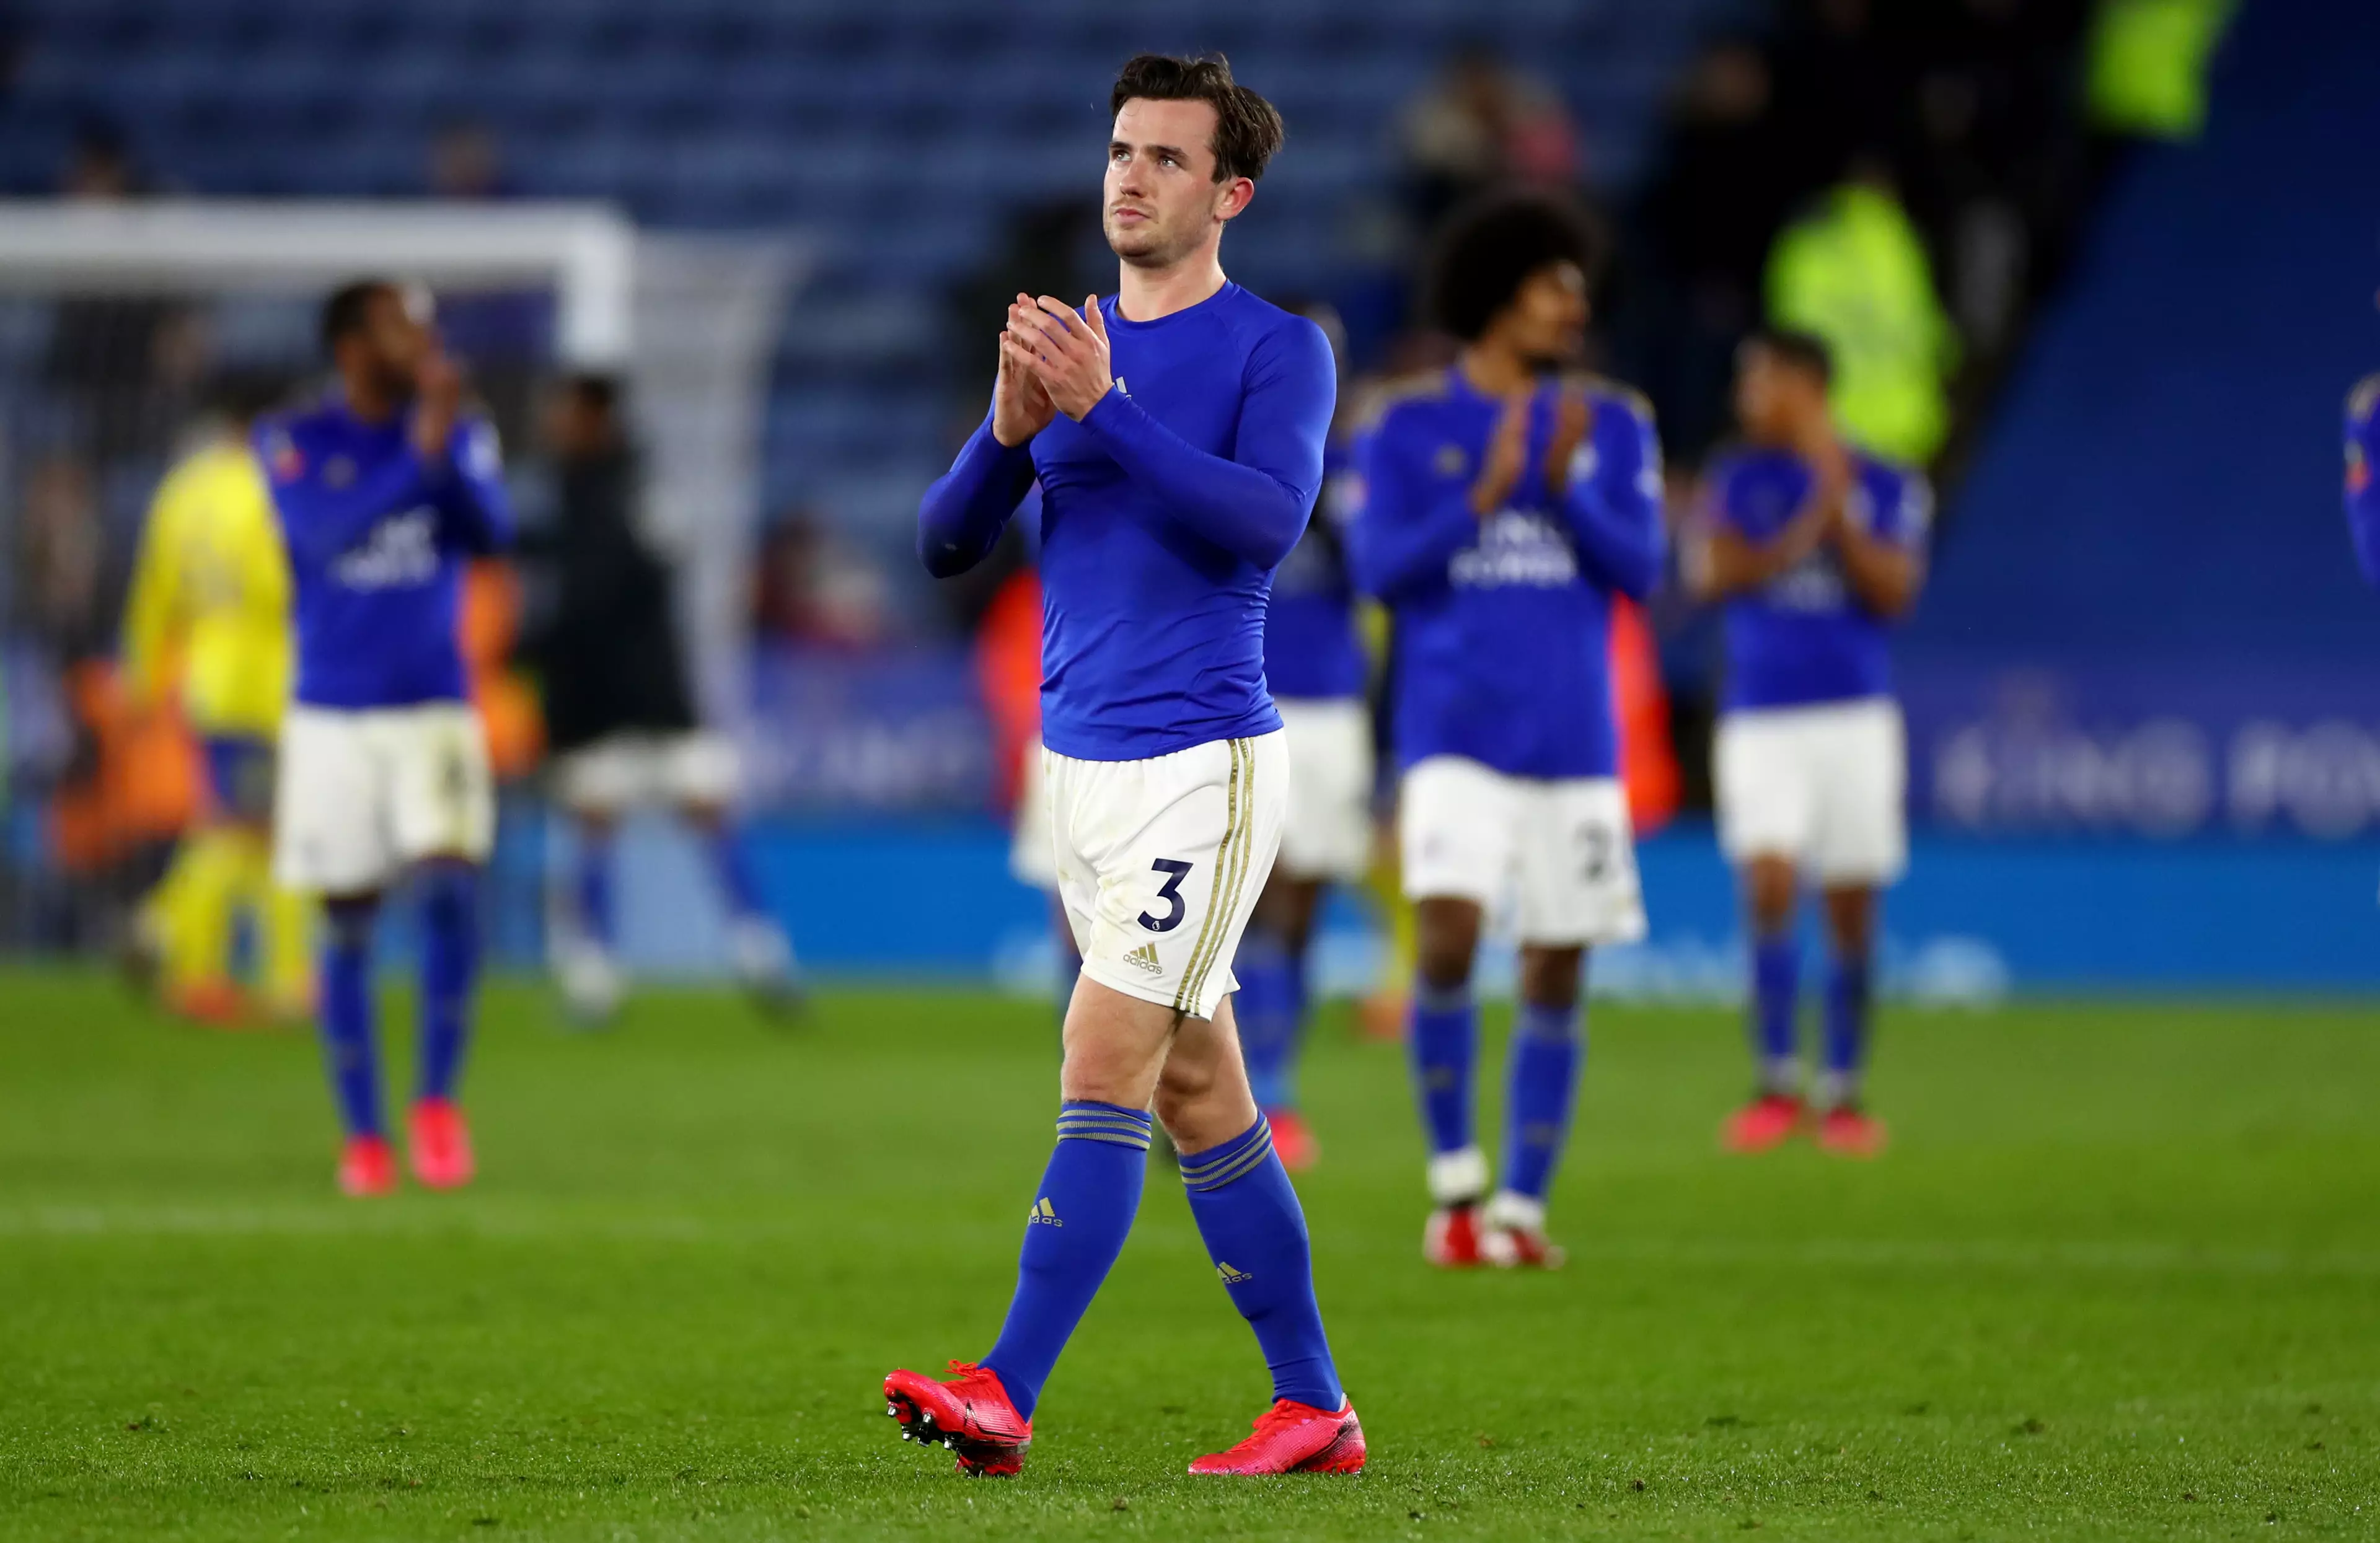 Chilwell was signed for around £40 million this summer. Image: PA Images